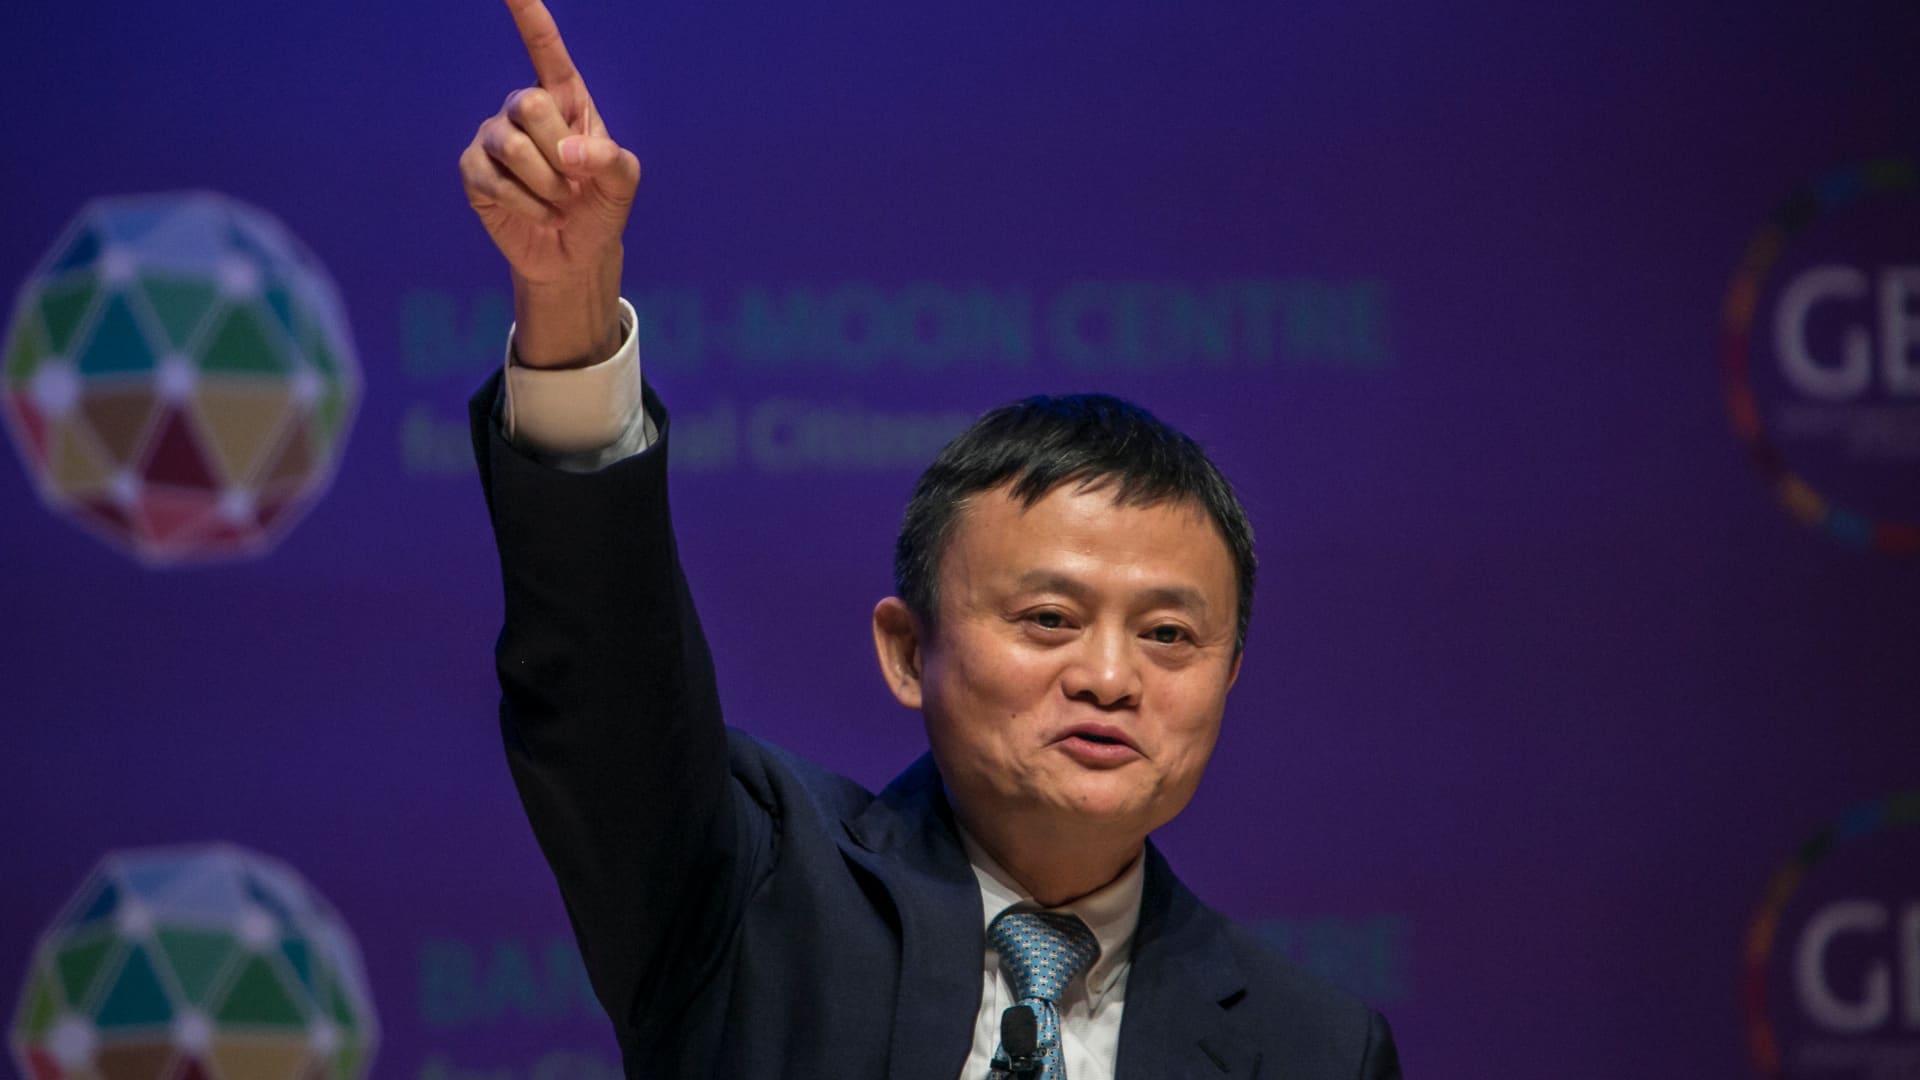 Alibaba founder Jack Ma re-emerges with praise of ‘transformations’